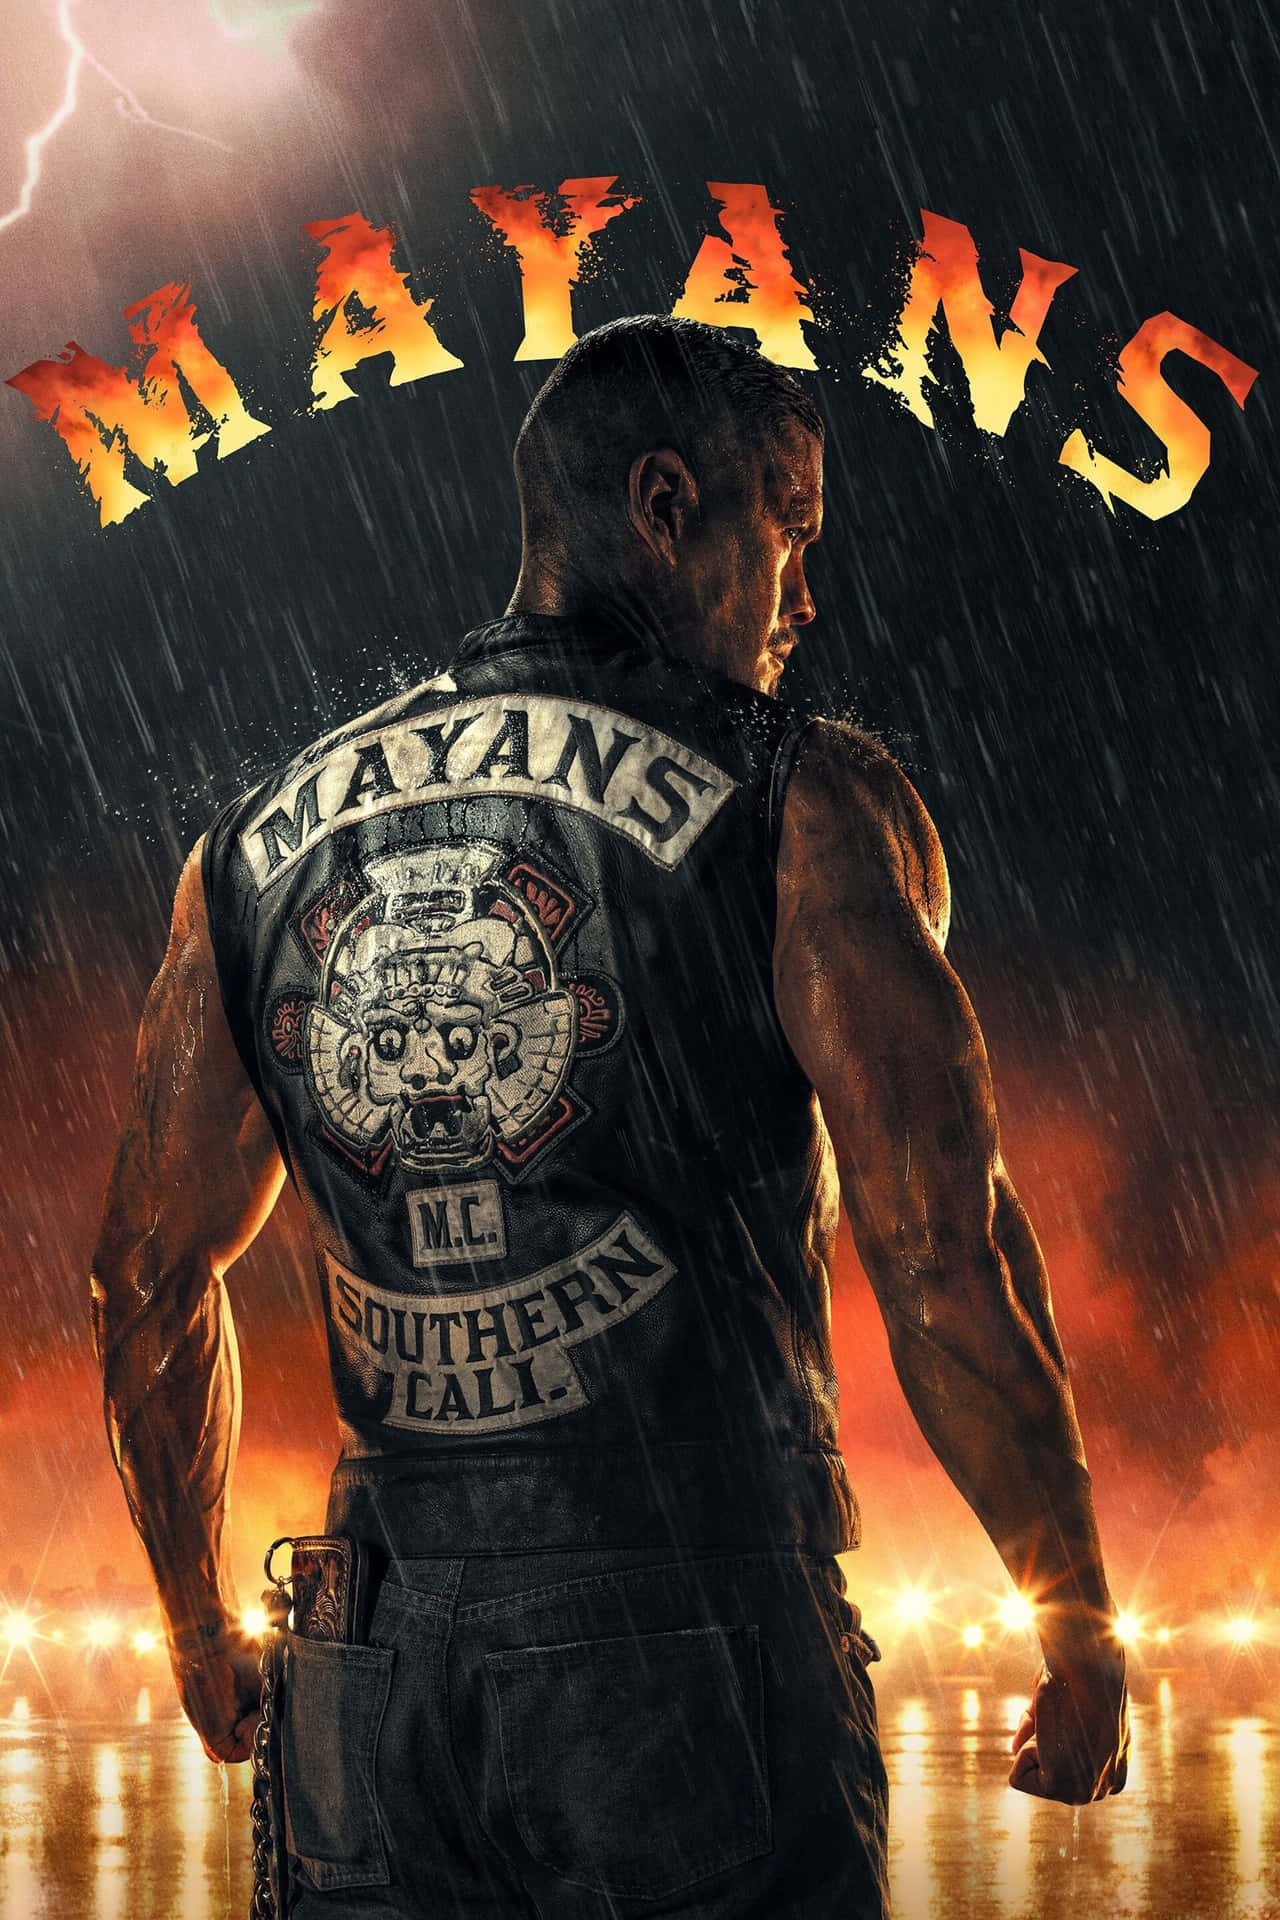 The Poster For Mayans Wallpaper